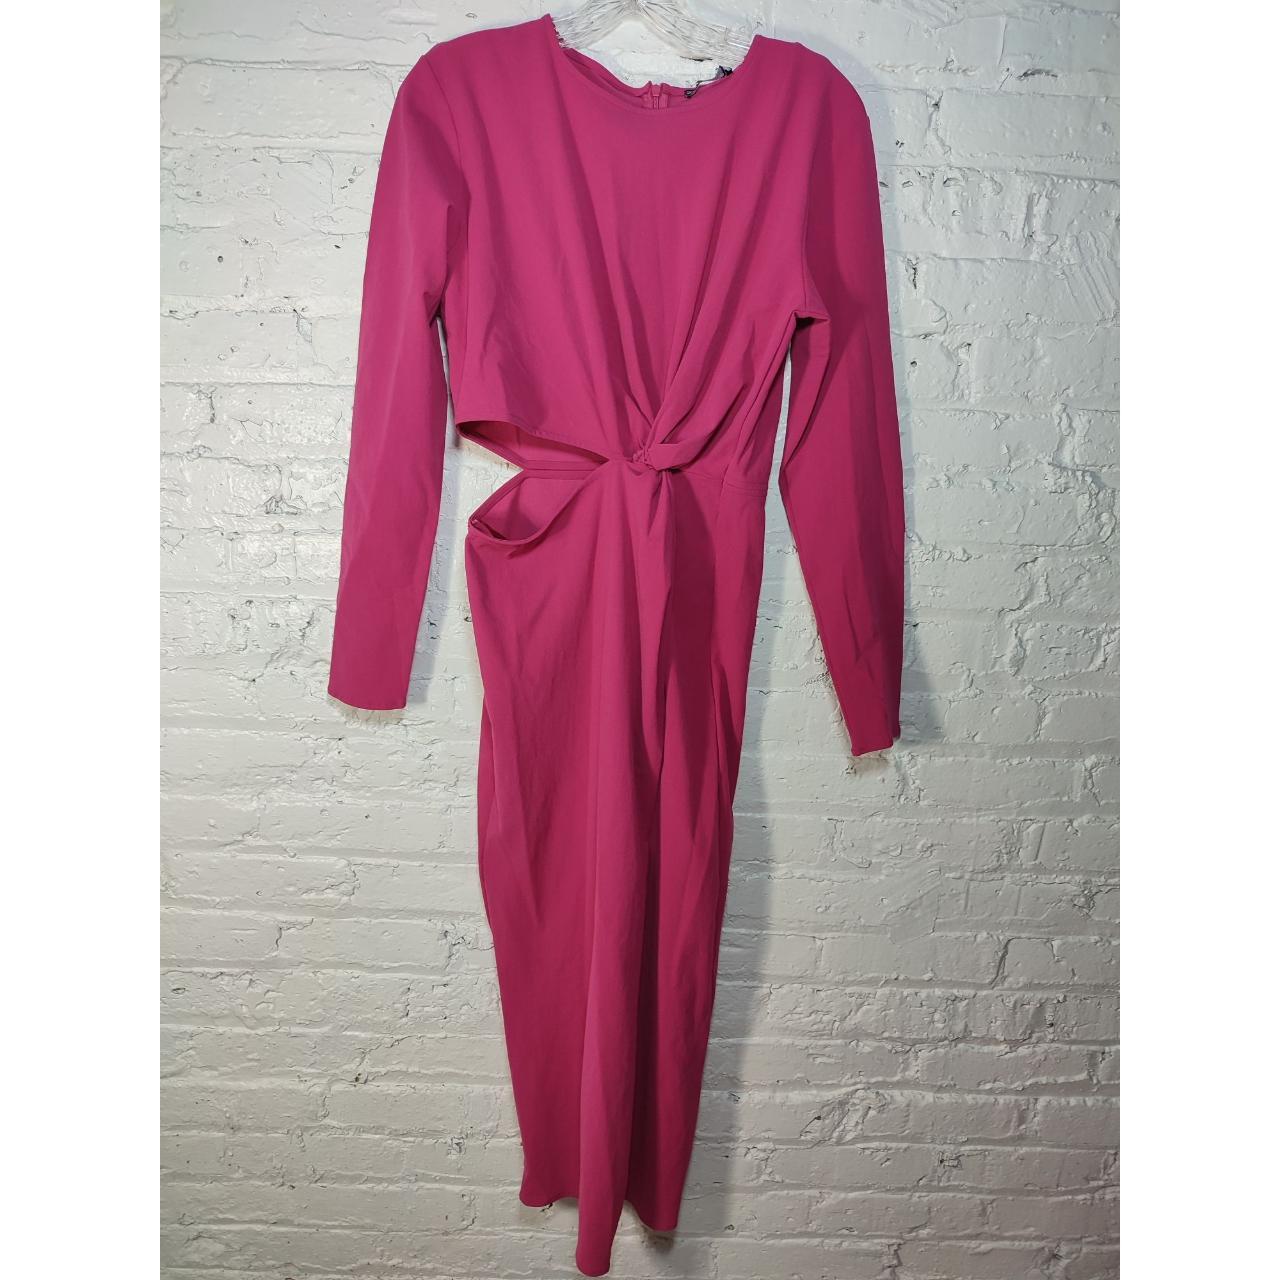 ZARA KNOTTED DRESS WITH CUT OUT pink size L armpit... - Depop